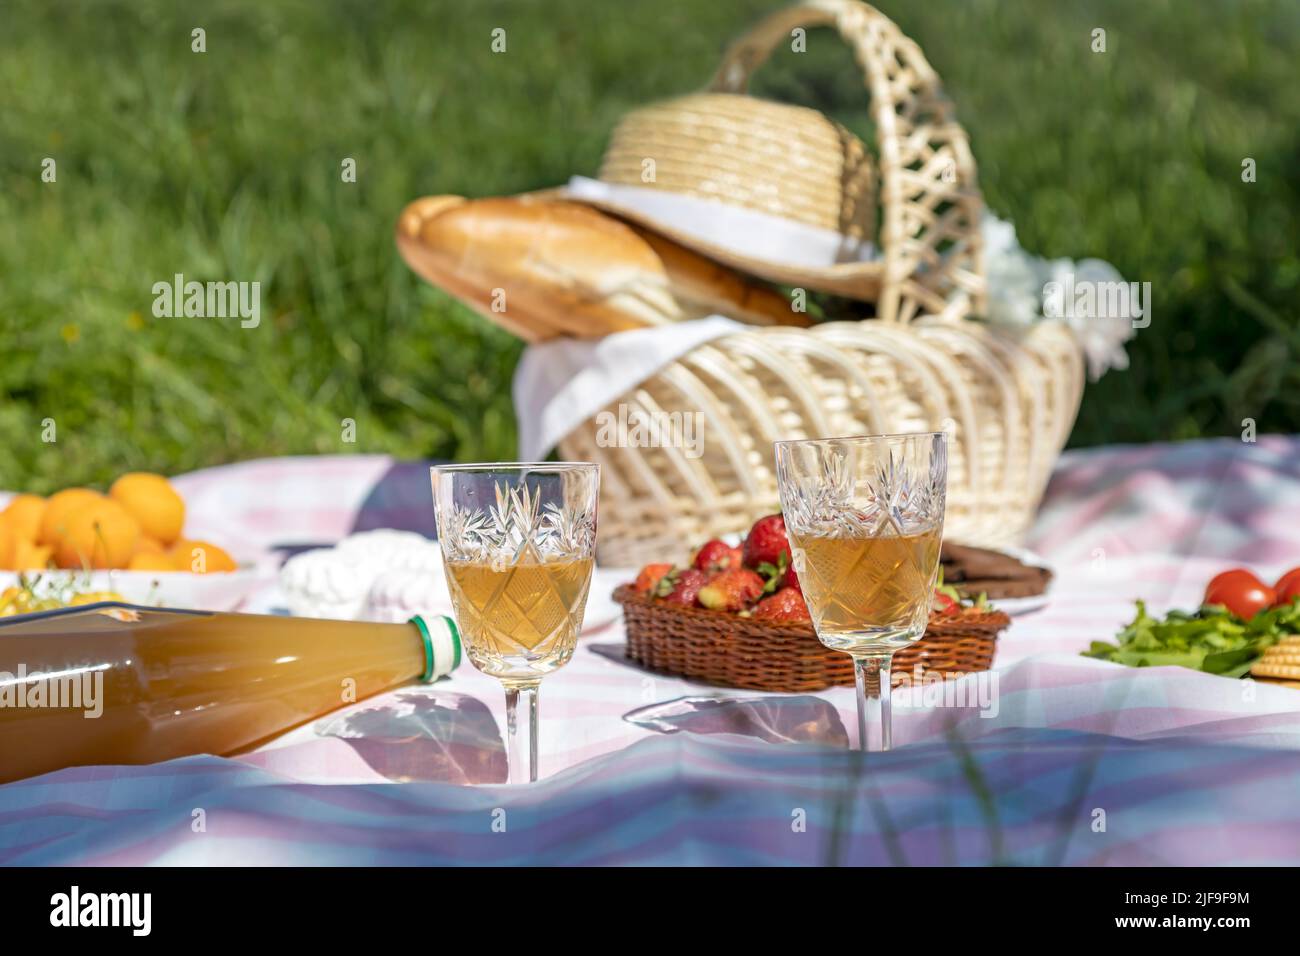 Picnic in the park, white wine in glasses, and baguettes in a basket. Stock Photo